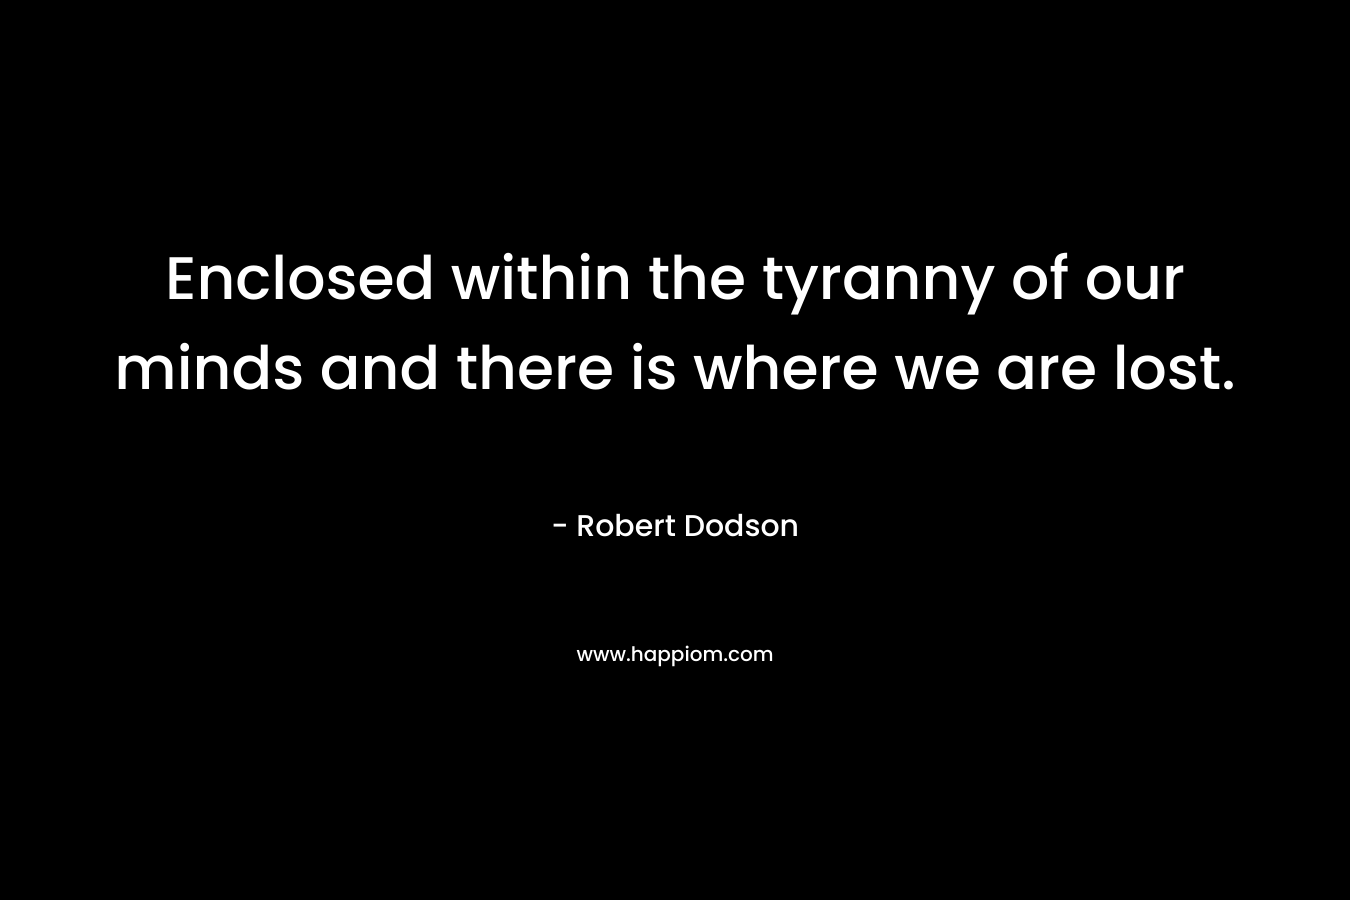 Enclosed within the tyranny of our minds and there is where we are lost. – Robert Dodson